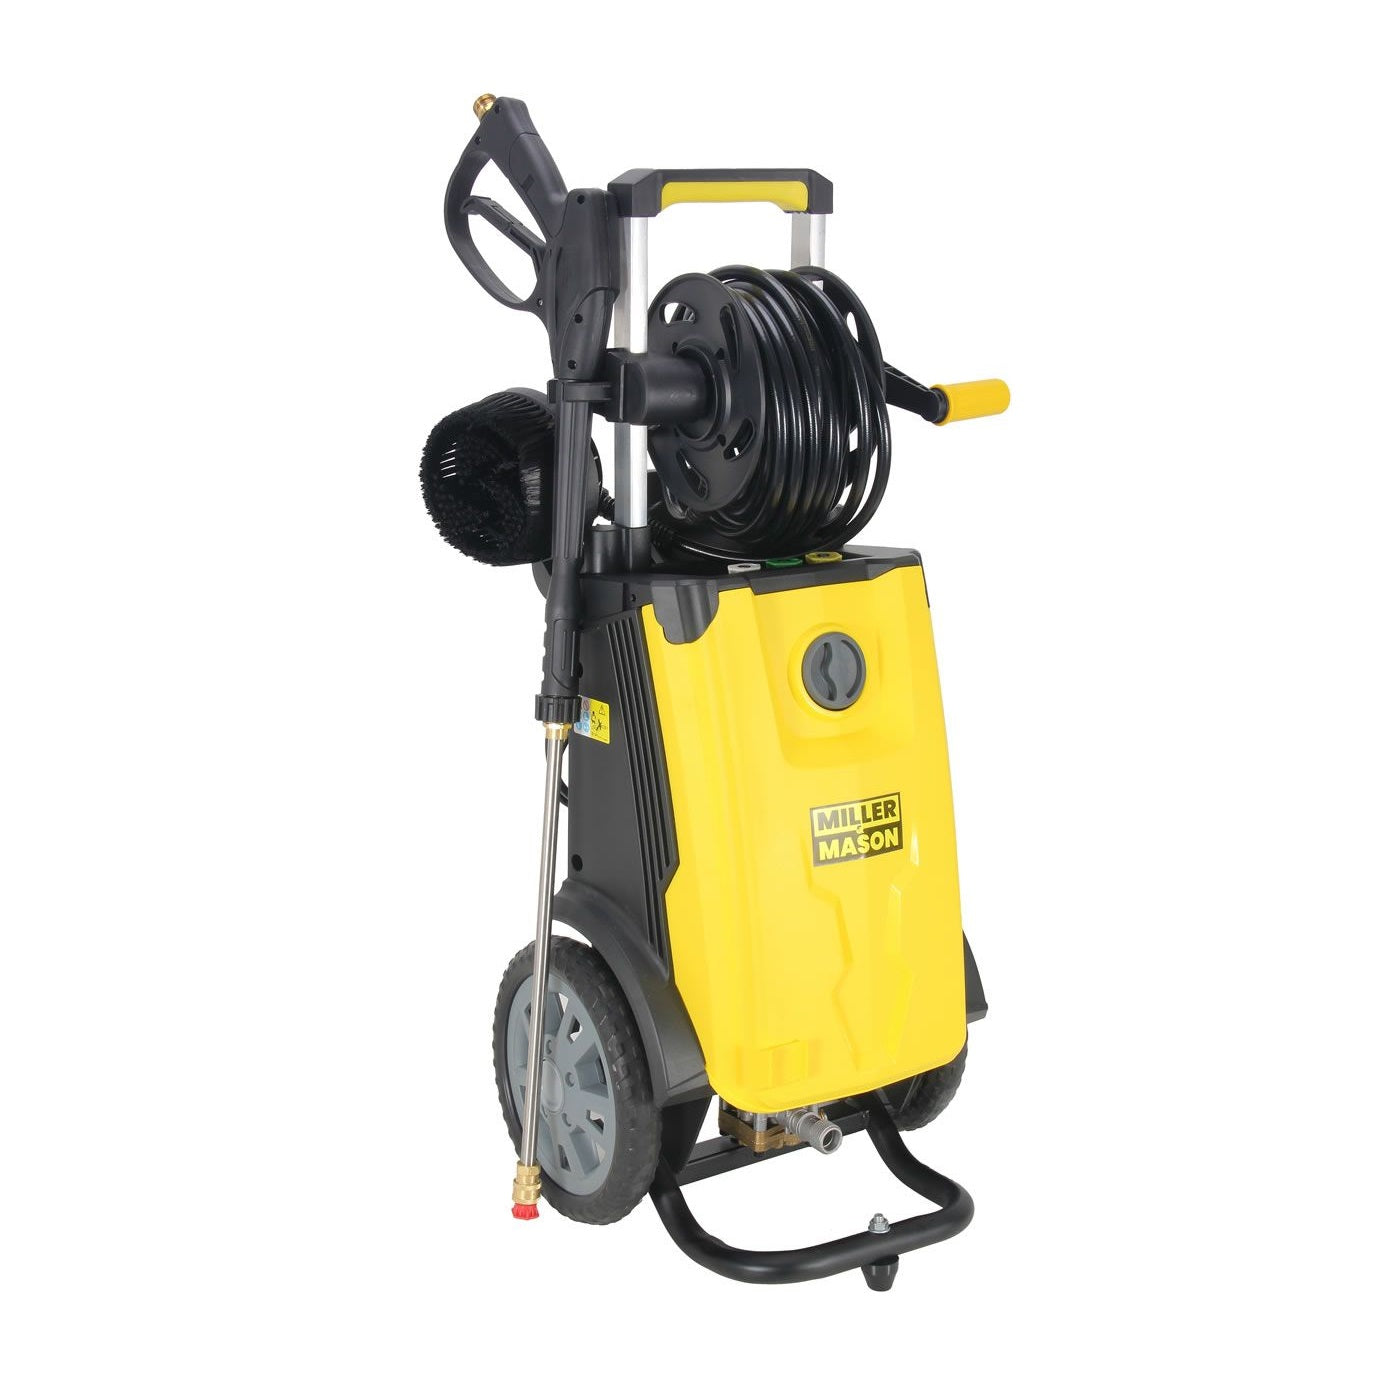 262 BAR 3800 PSI ELECTRIC PRESSURE WASHER JET POWER WASHER